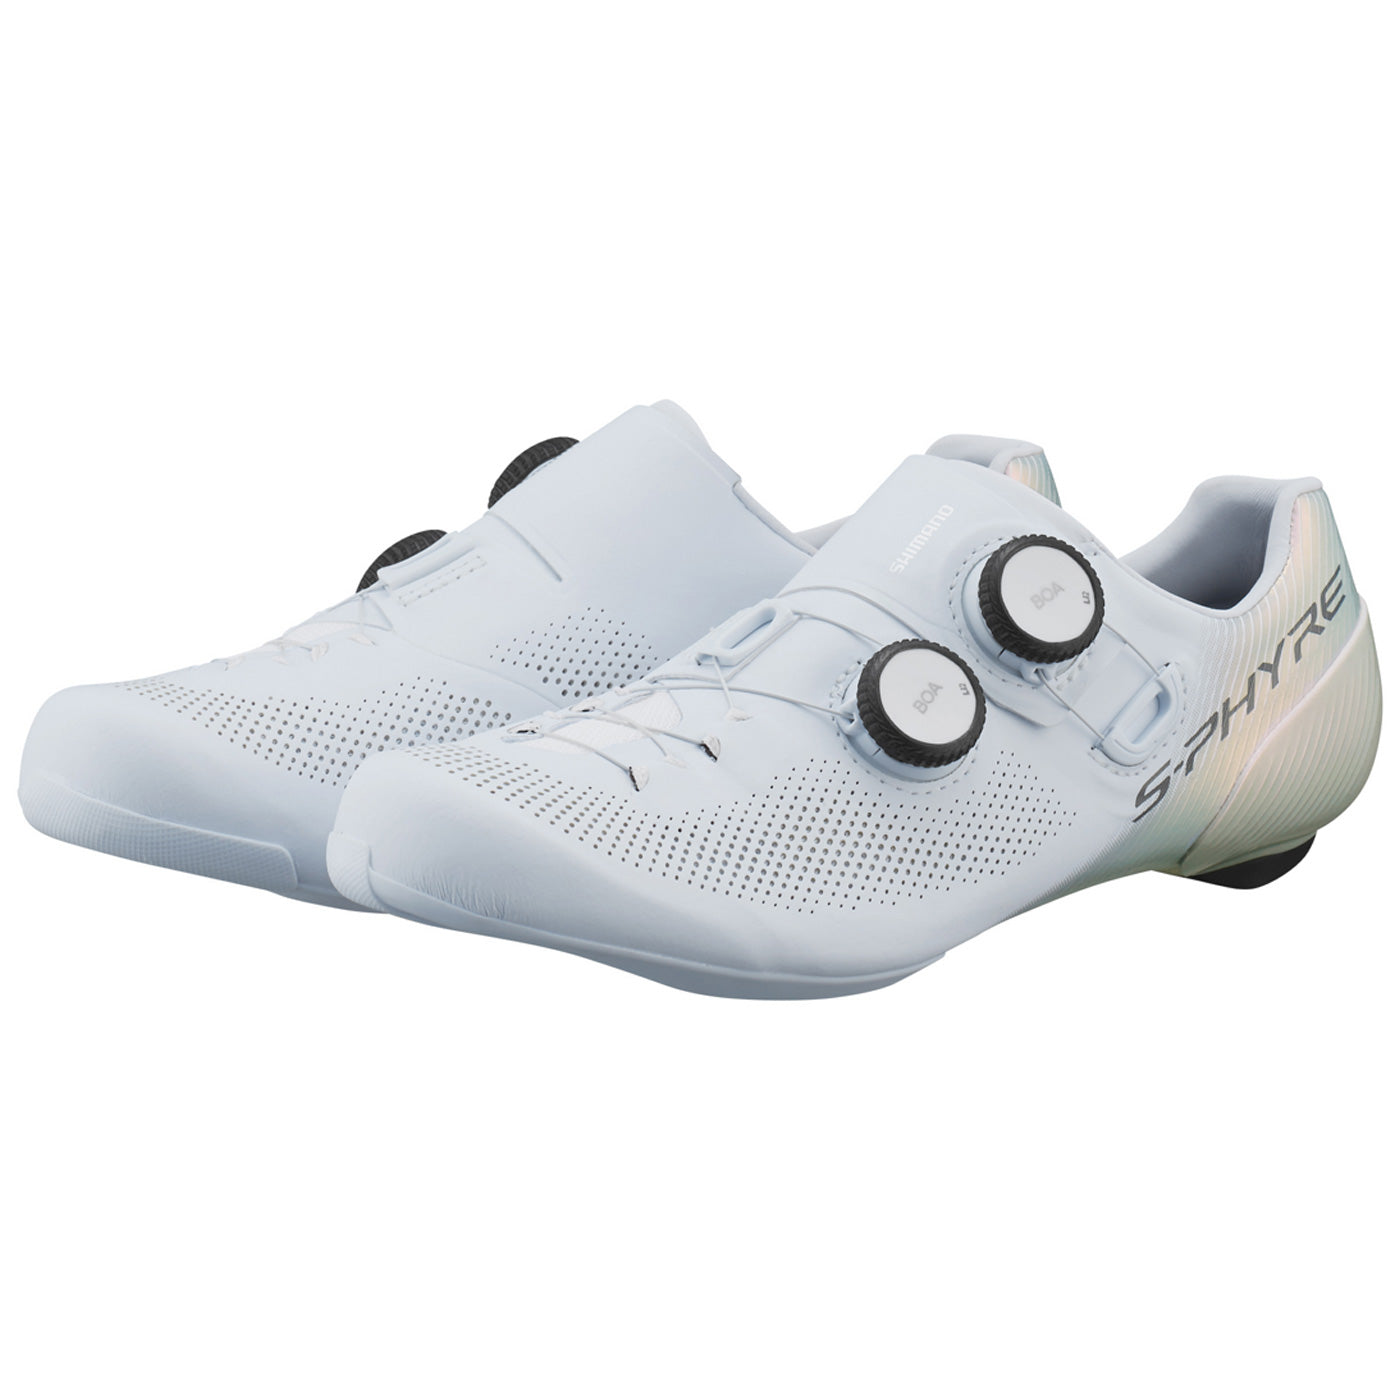 Chaussures femme Shimano S-Phyre RC903 - Blanc